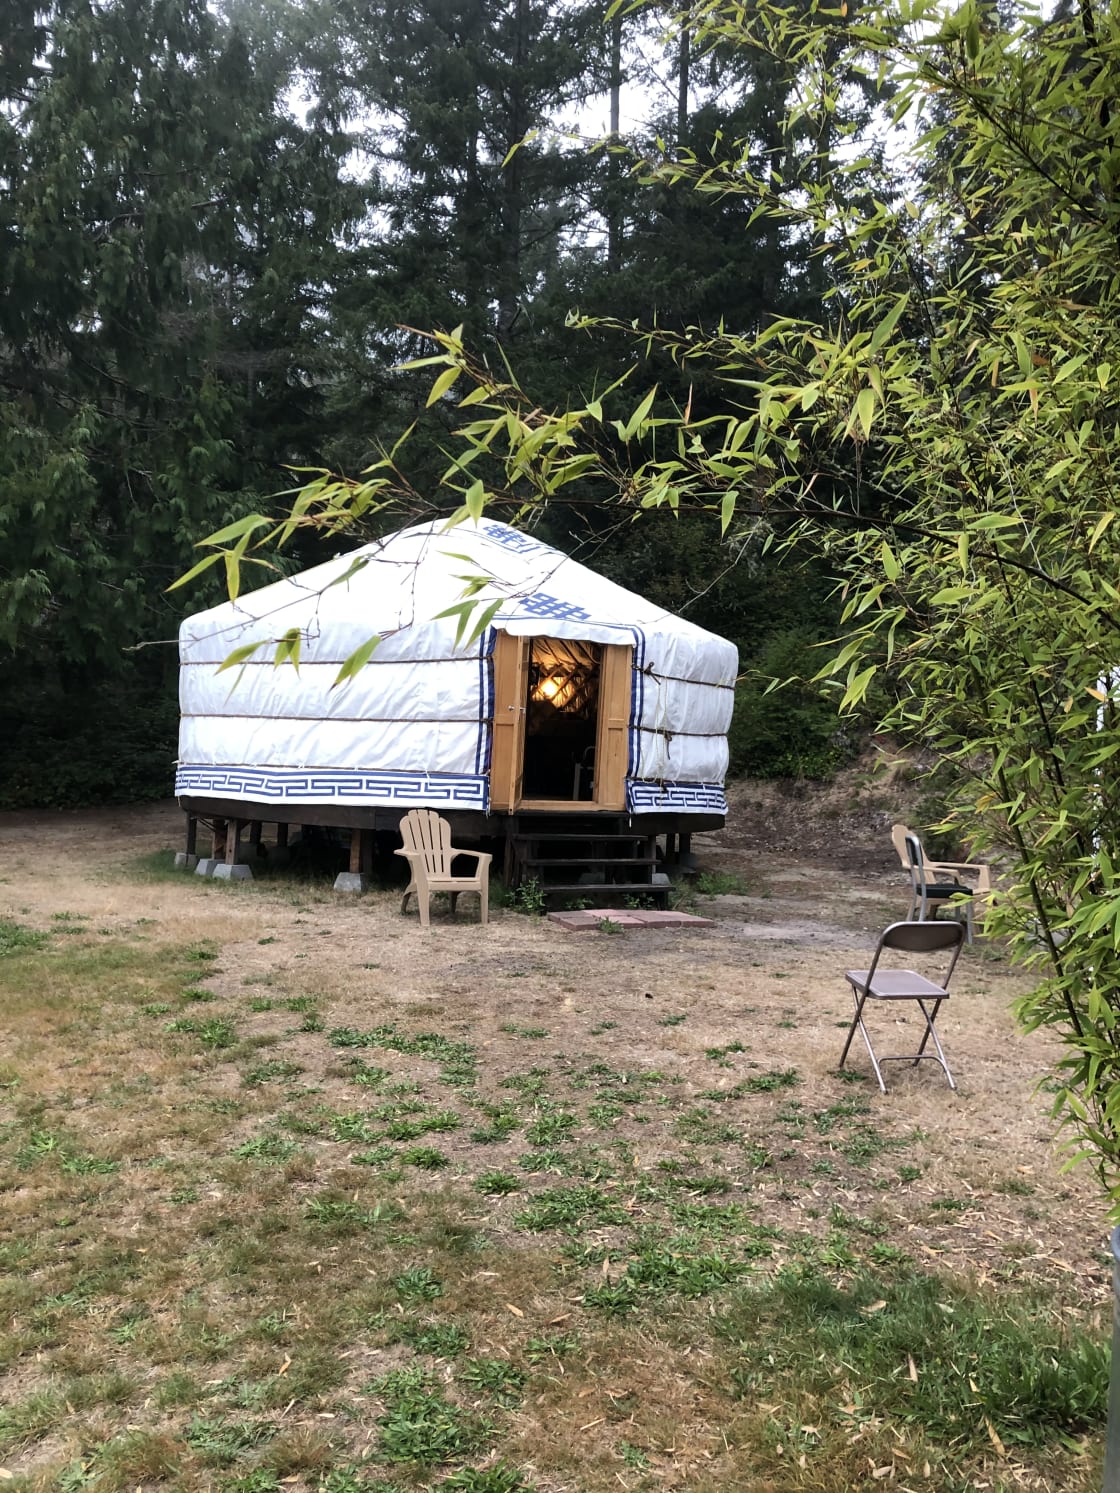 The Yurt was very warm when it got cool at night. Very cozy!